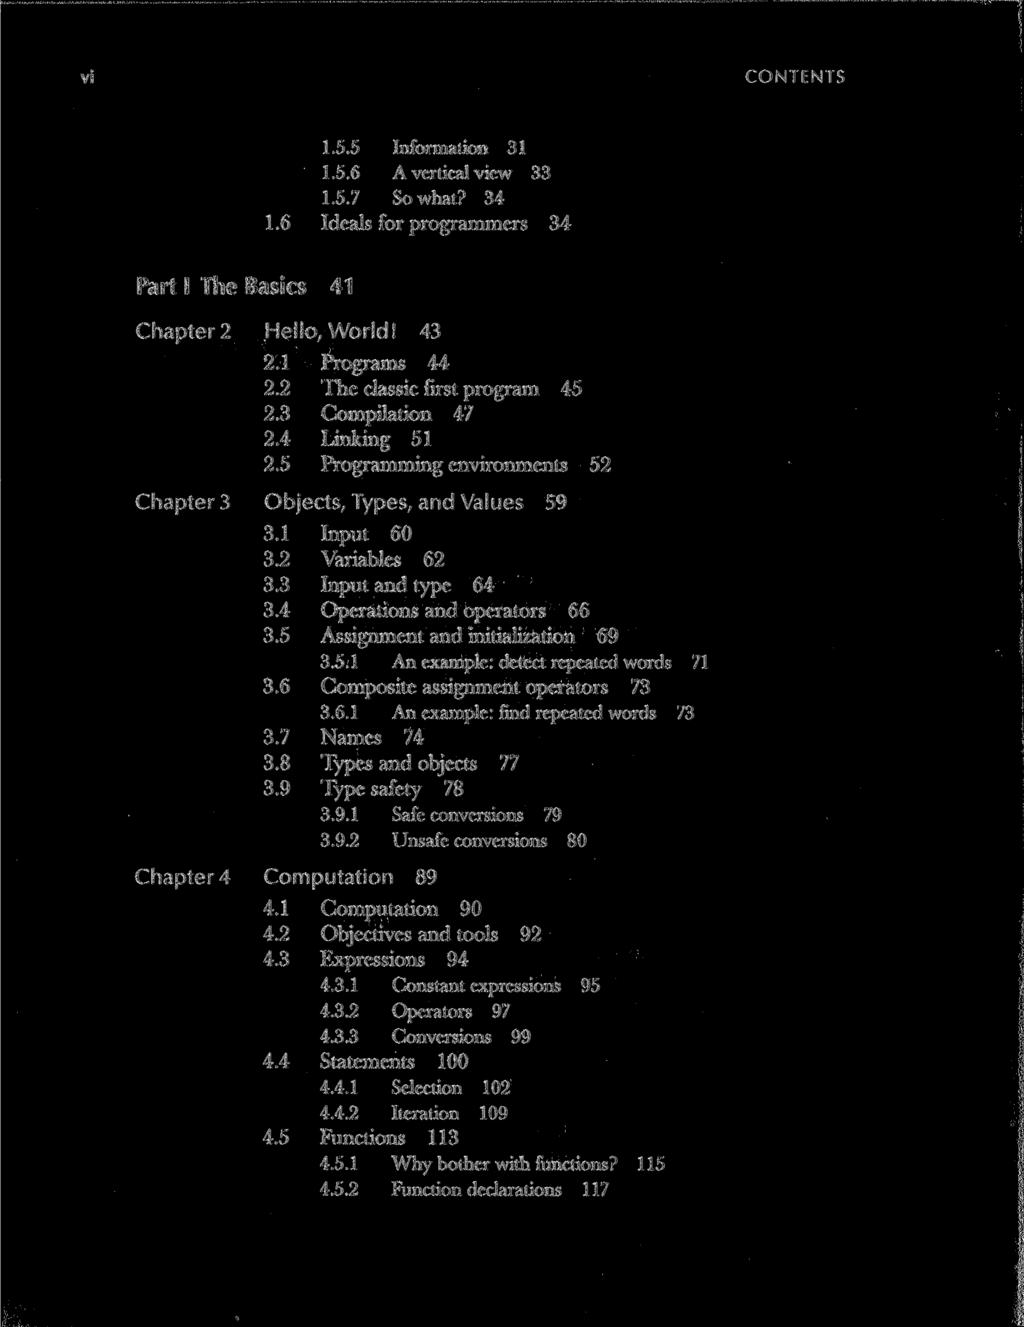 VI 1.5.5 Information 31 1.5.6 A vertical view 33 1.5.7 So what? 34 1.6 Ideals for programmers 34 Part I The Basics 41 Chapter 2 Hello, World! 43 2.1 Programs 44 2.2 The classic first program 45 2.